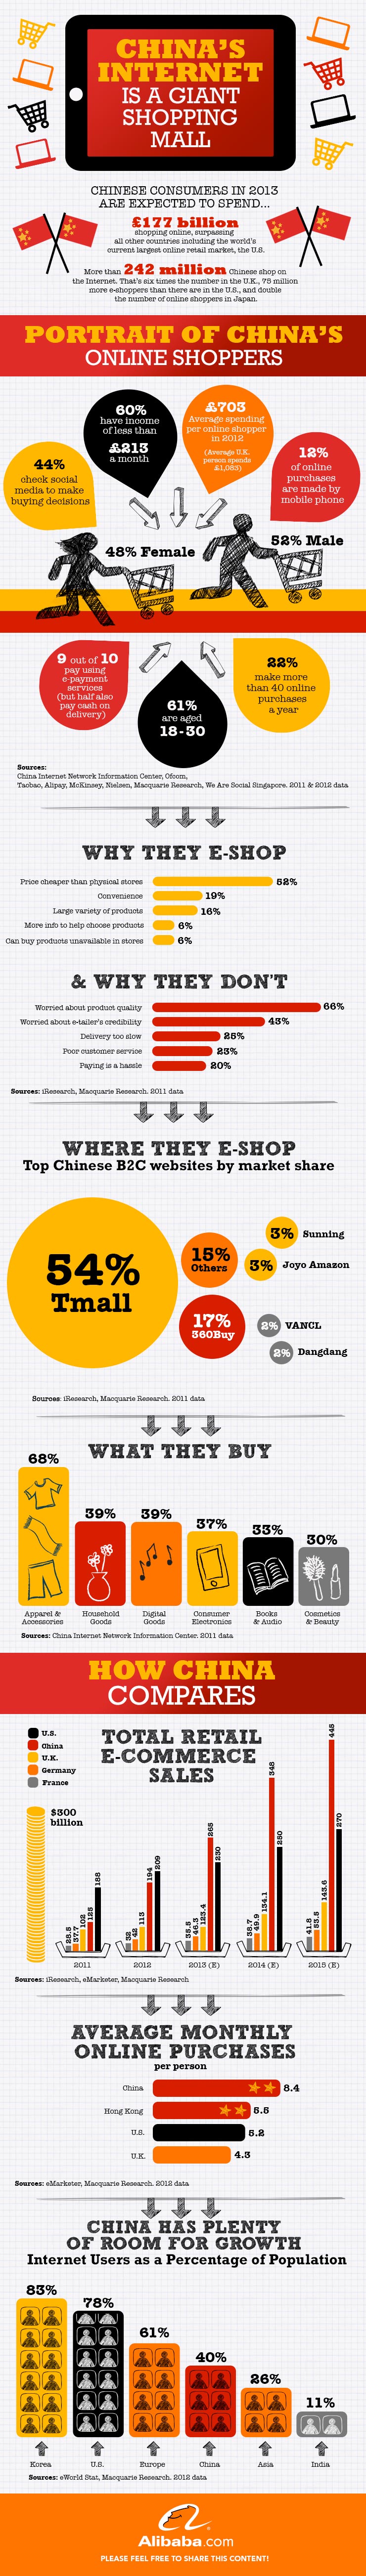 Infographie-e-commerce-chine